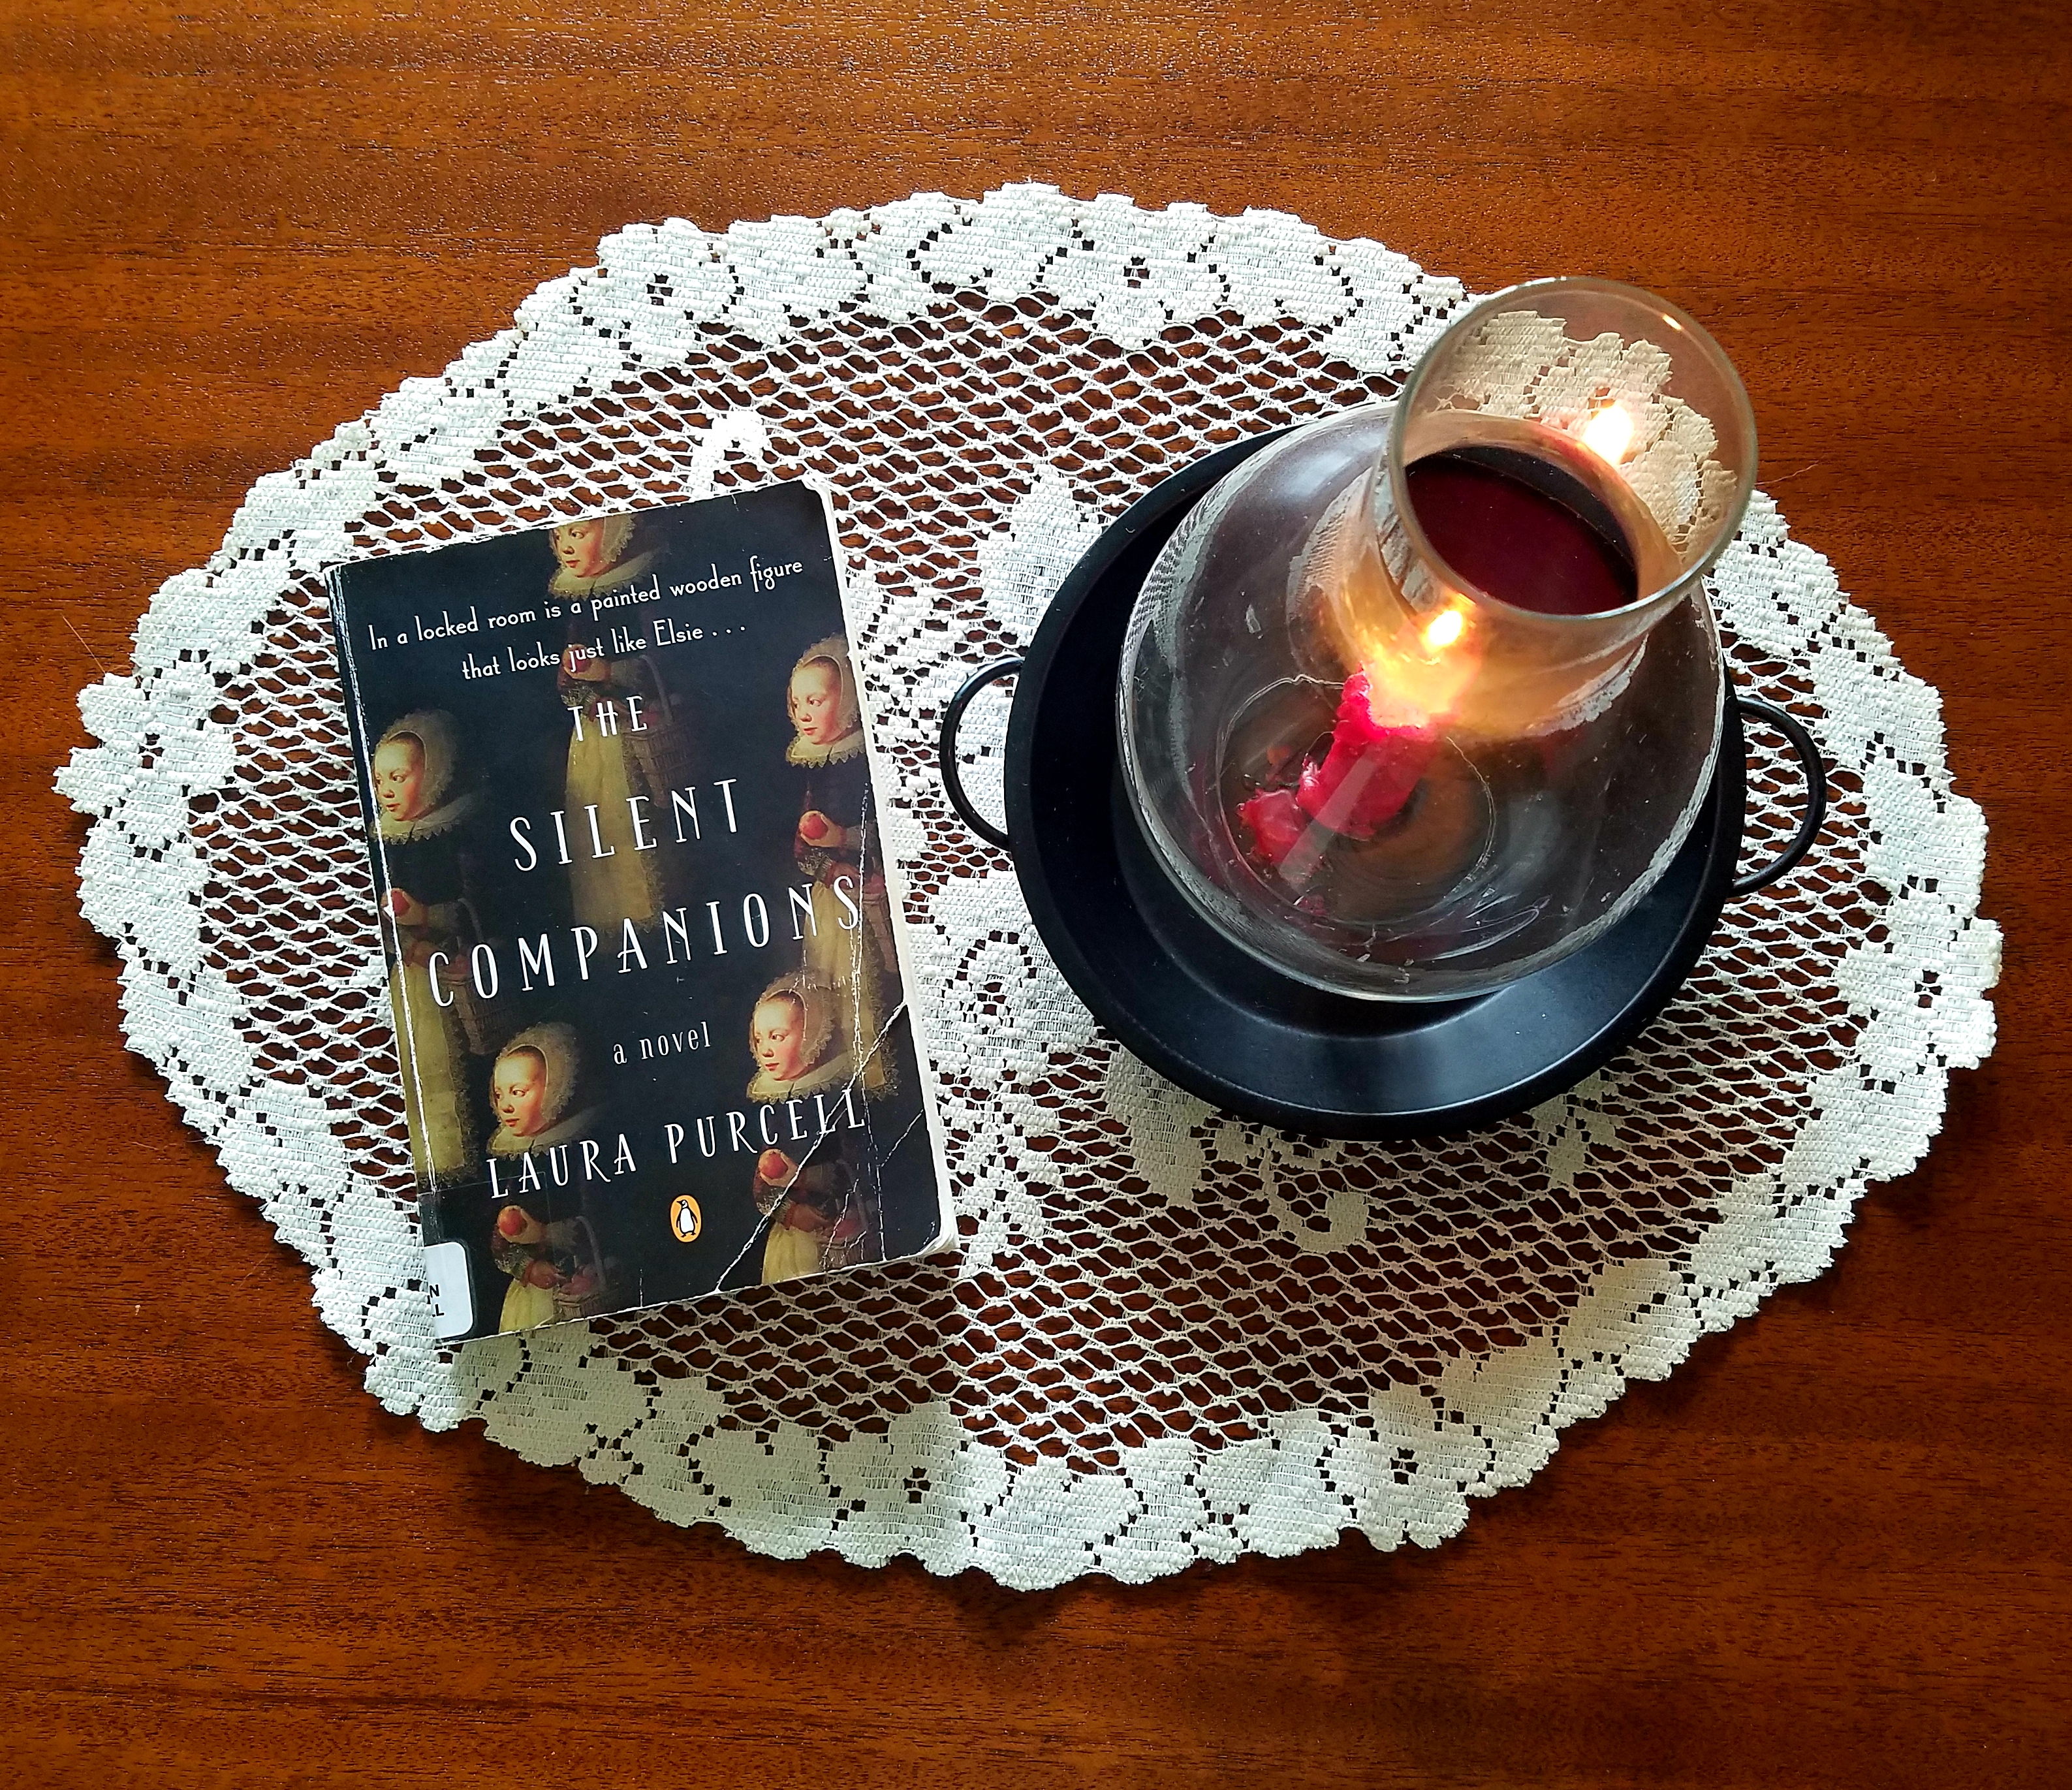 Book Review of THE SILENT COMPANIONS